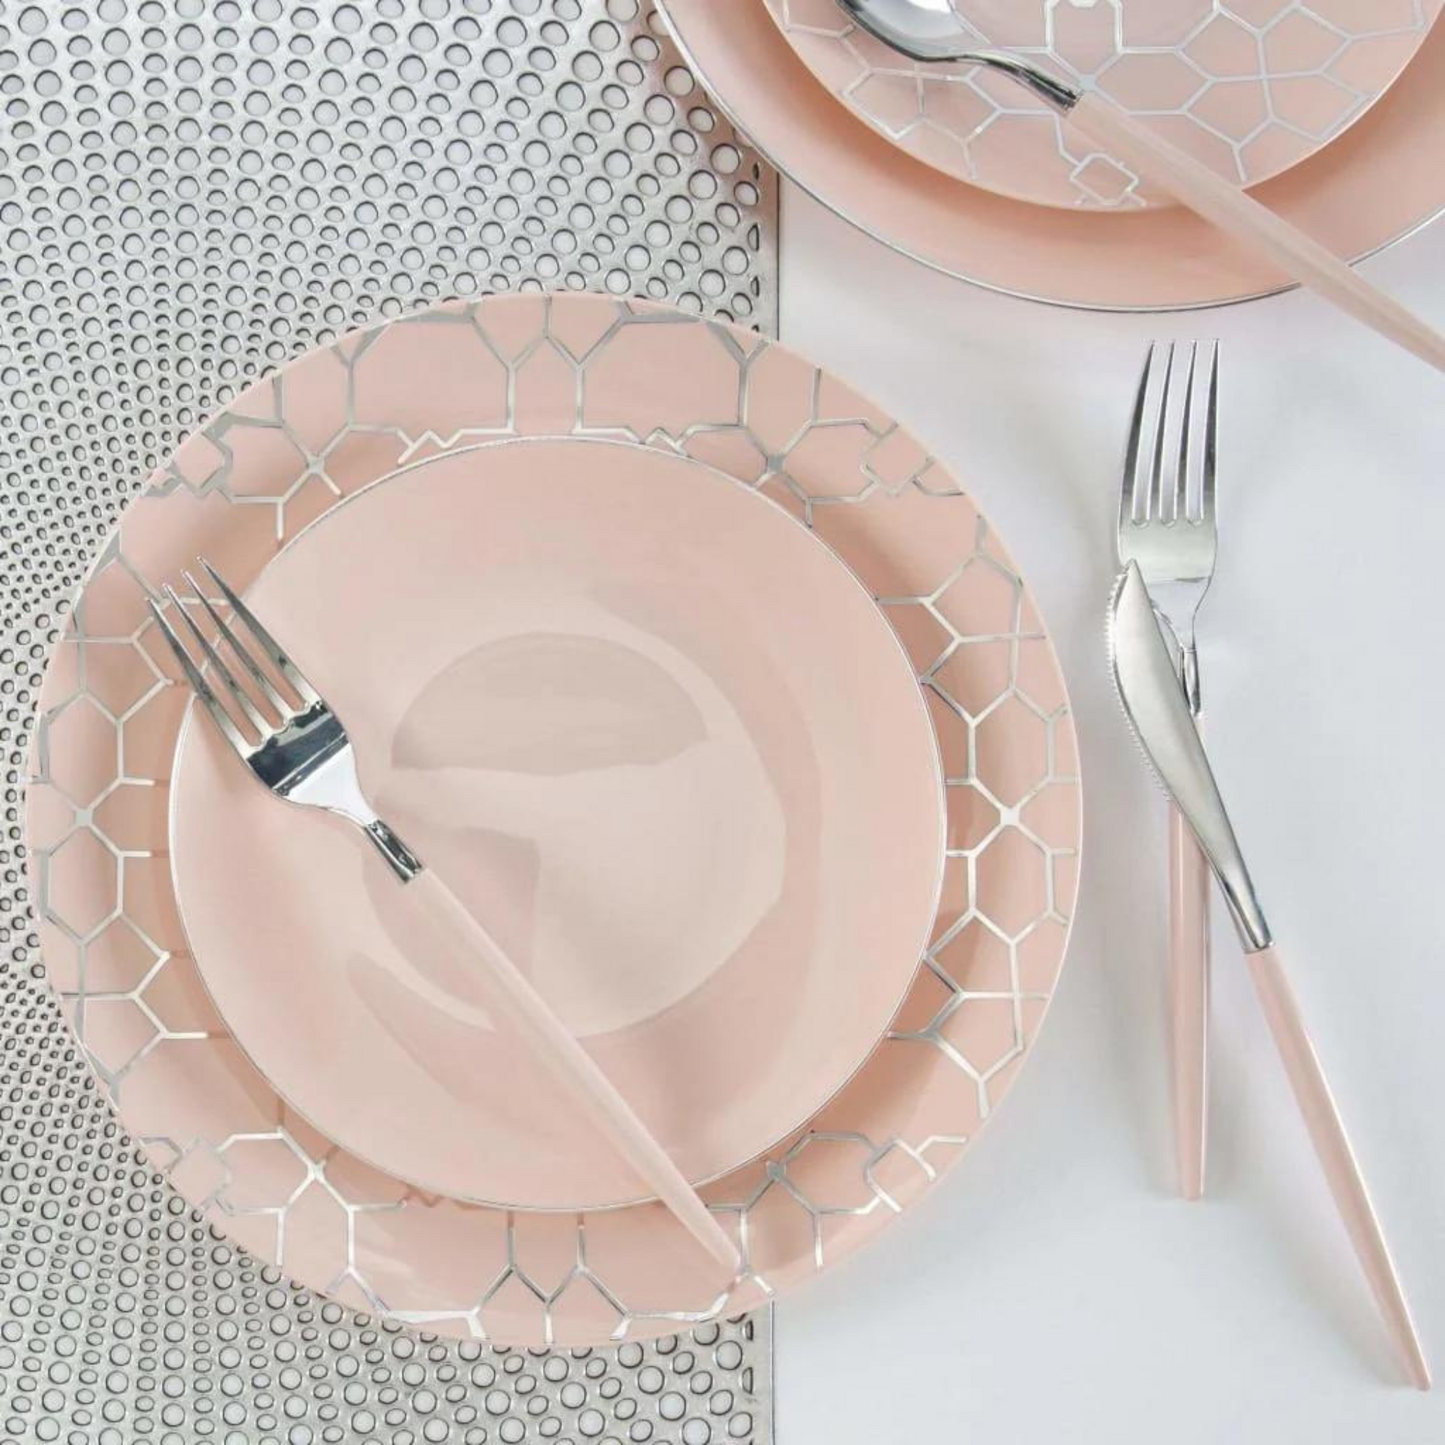 round chic reusable blush pink and silver dinner plates - pack of 10, luxe party